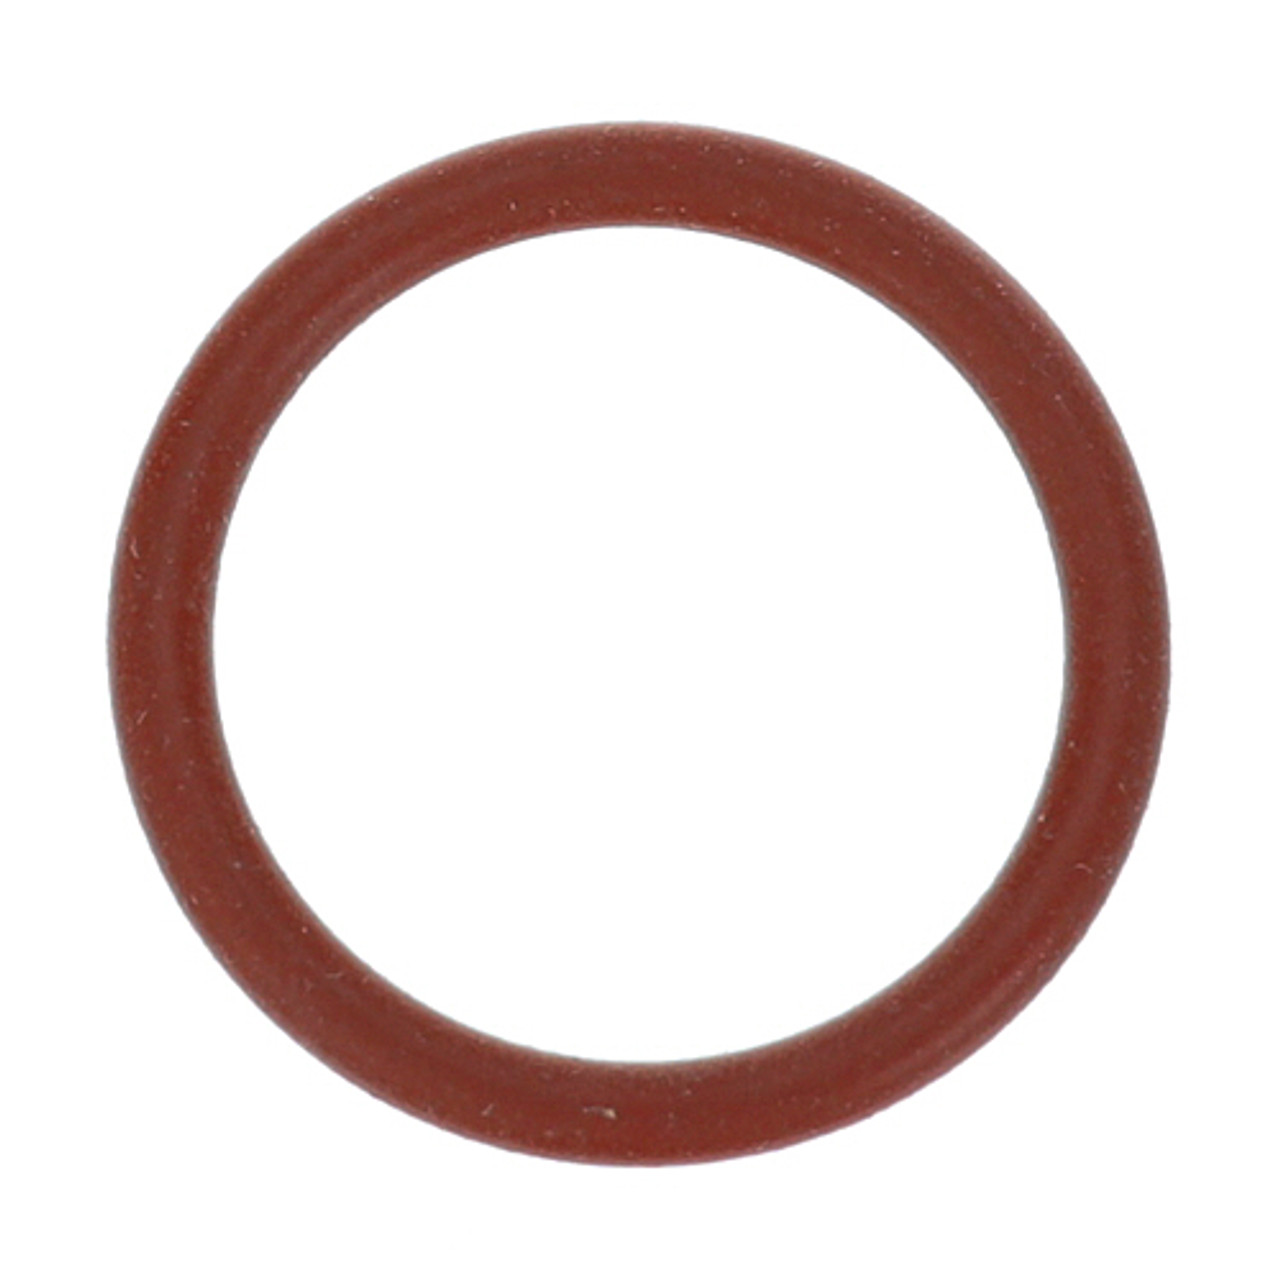 O-Ring 13/16" X 3/32" Width - Replacement Part For Jackson 05330-002-60-69